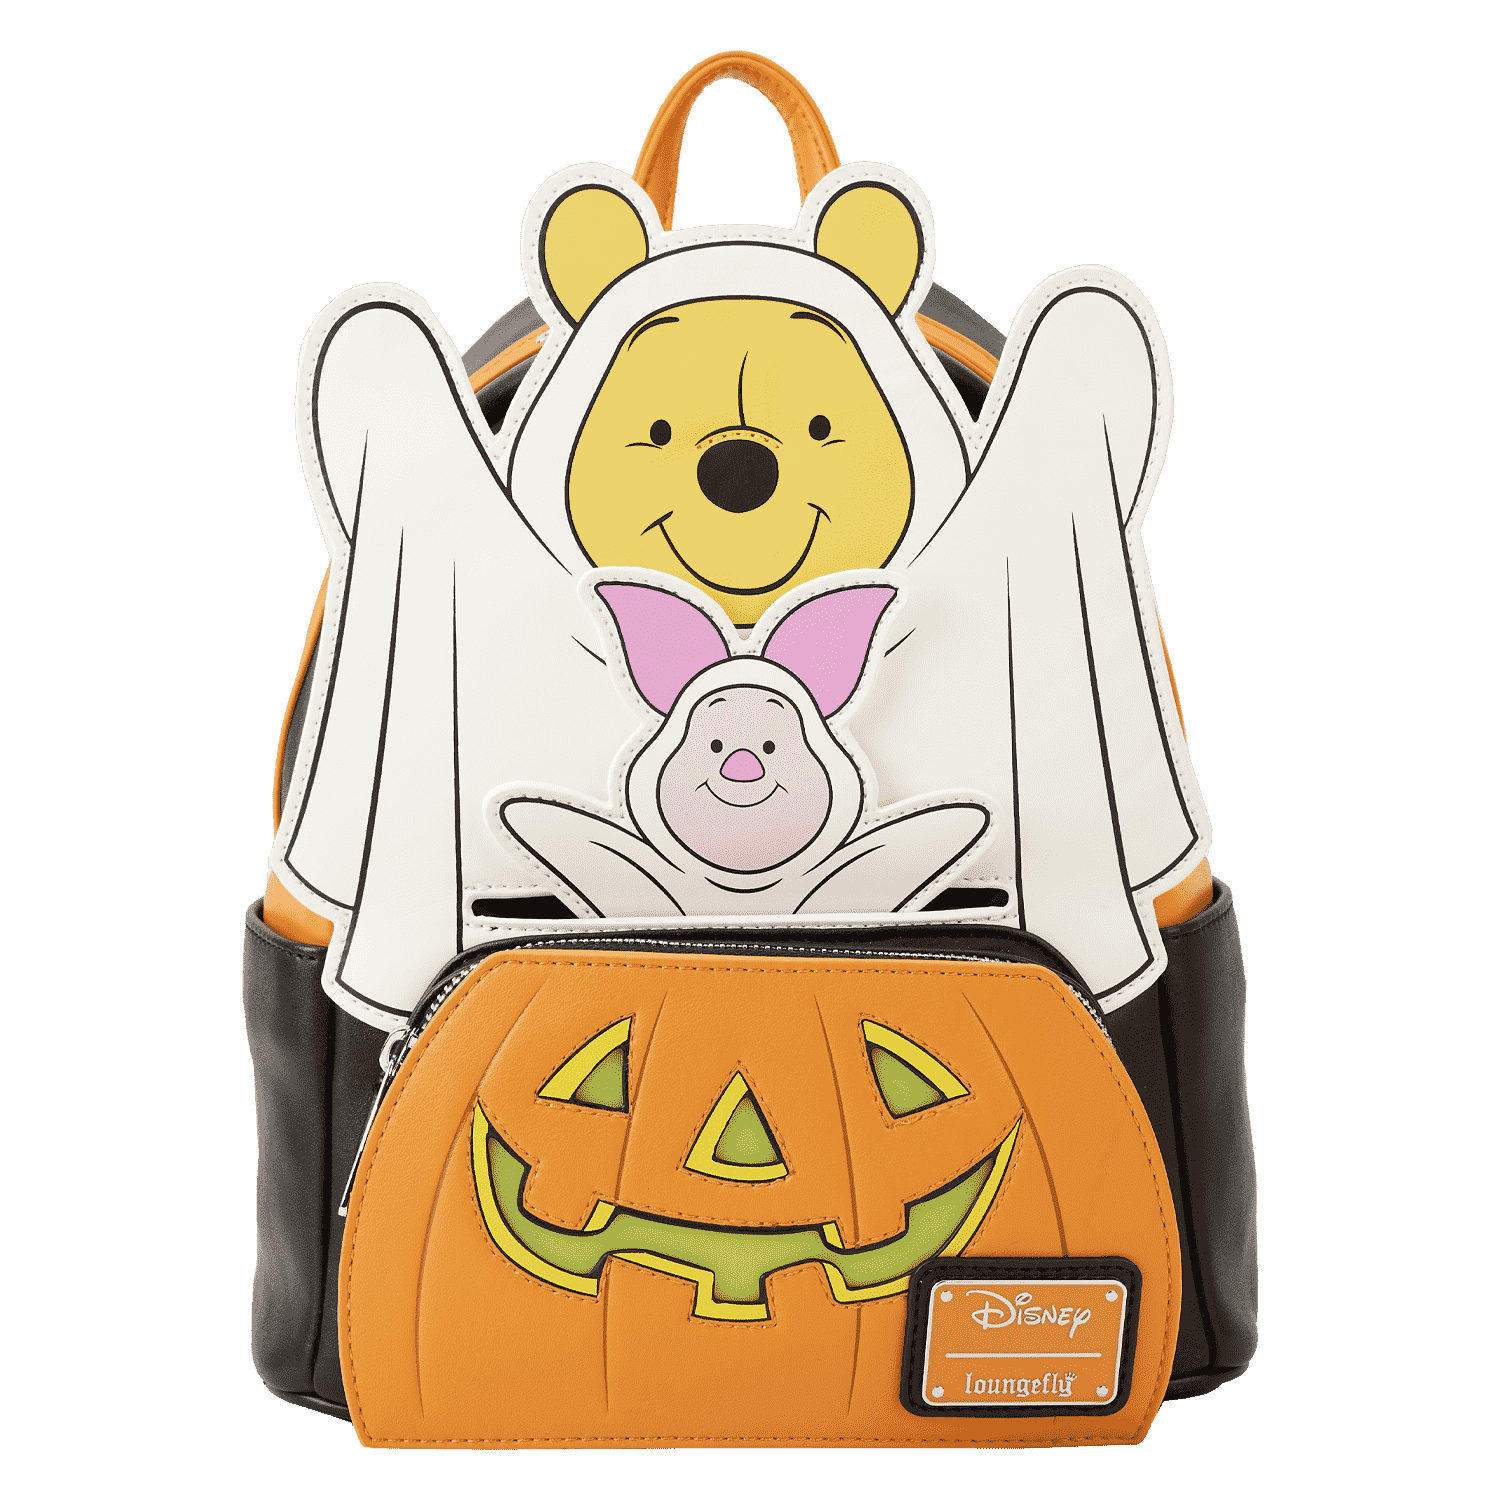 Buy Limited Edition Exclusive Pooh & Piglet Halloween Light Up Mini Backpack at Loungefly.